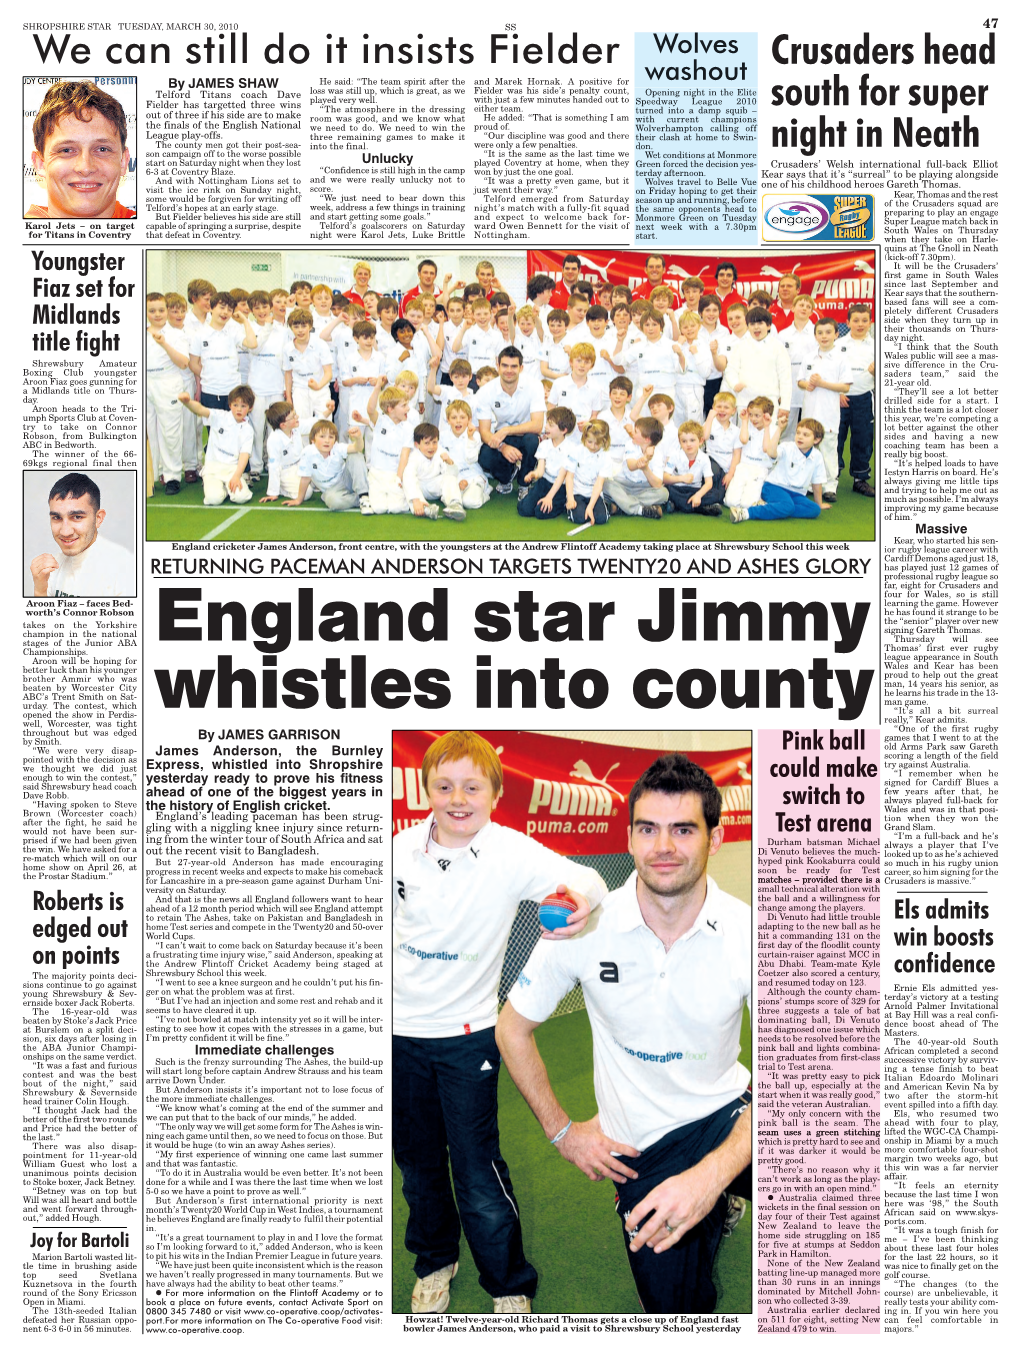 England Star Jimmy Whistles Into County